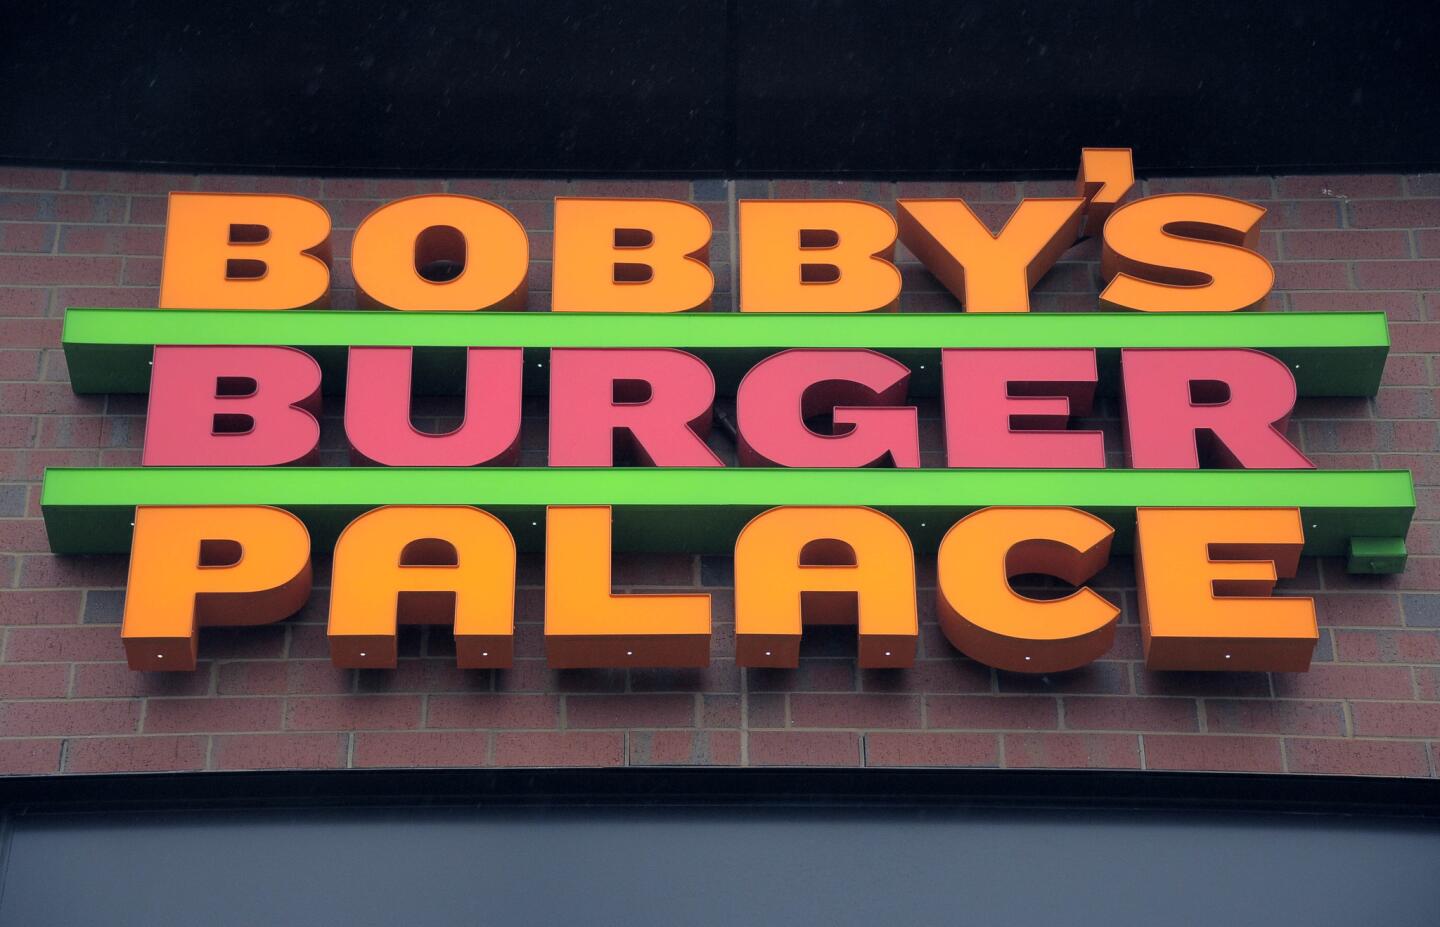 Bobby’s Burger Palace opened in Towson at the end of July. The burger joint owned by celebrity chef Bobby Flay is located in Towson Square, near the new Towson Cinemark theater. The restaurant's specialties, according to a release, are "the Crunchburger with double American cheese and potato chips, and the Crunch Salad with chopped vegetables, romaine, crispy tortillas, white cheddar cheese cubes and balsamic dressing."